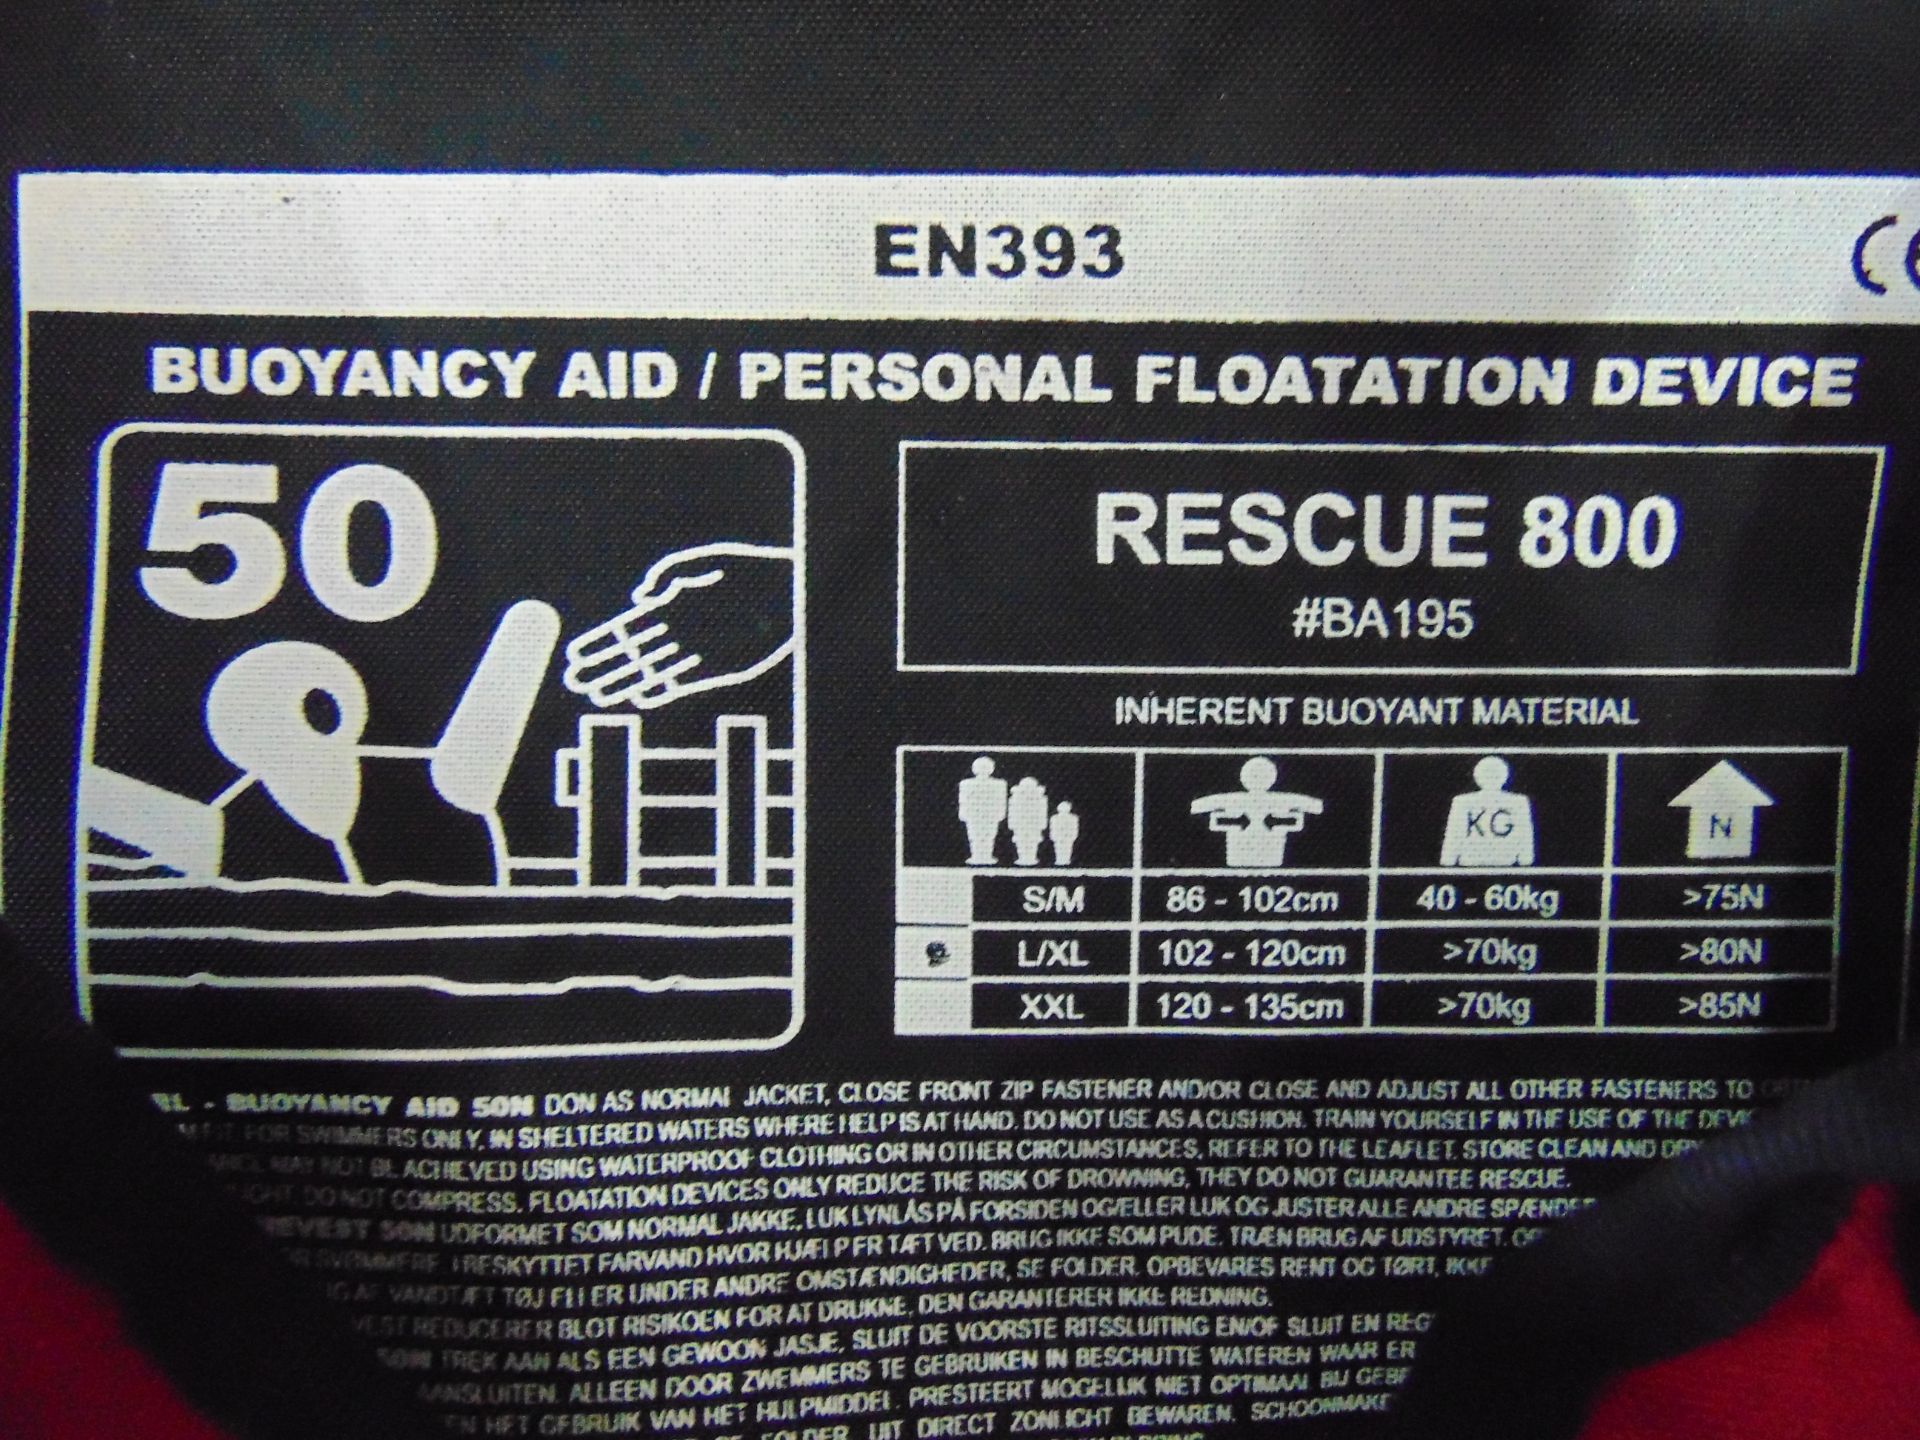 Palm Professional Rescue 800 Buoyancy Aid - PFD Personal Floatation Device Size L/XL - Image 4 of 4